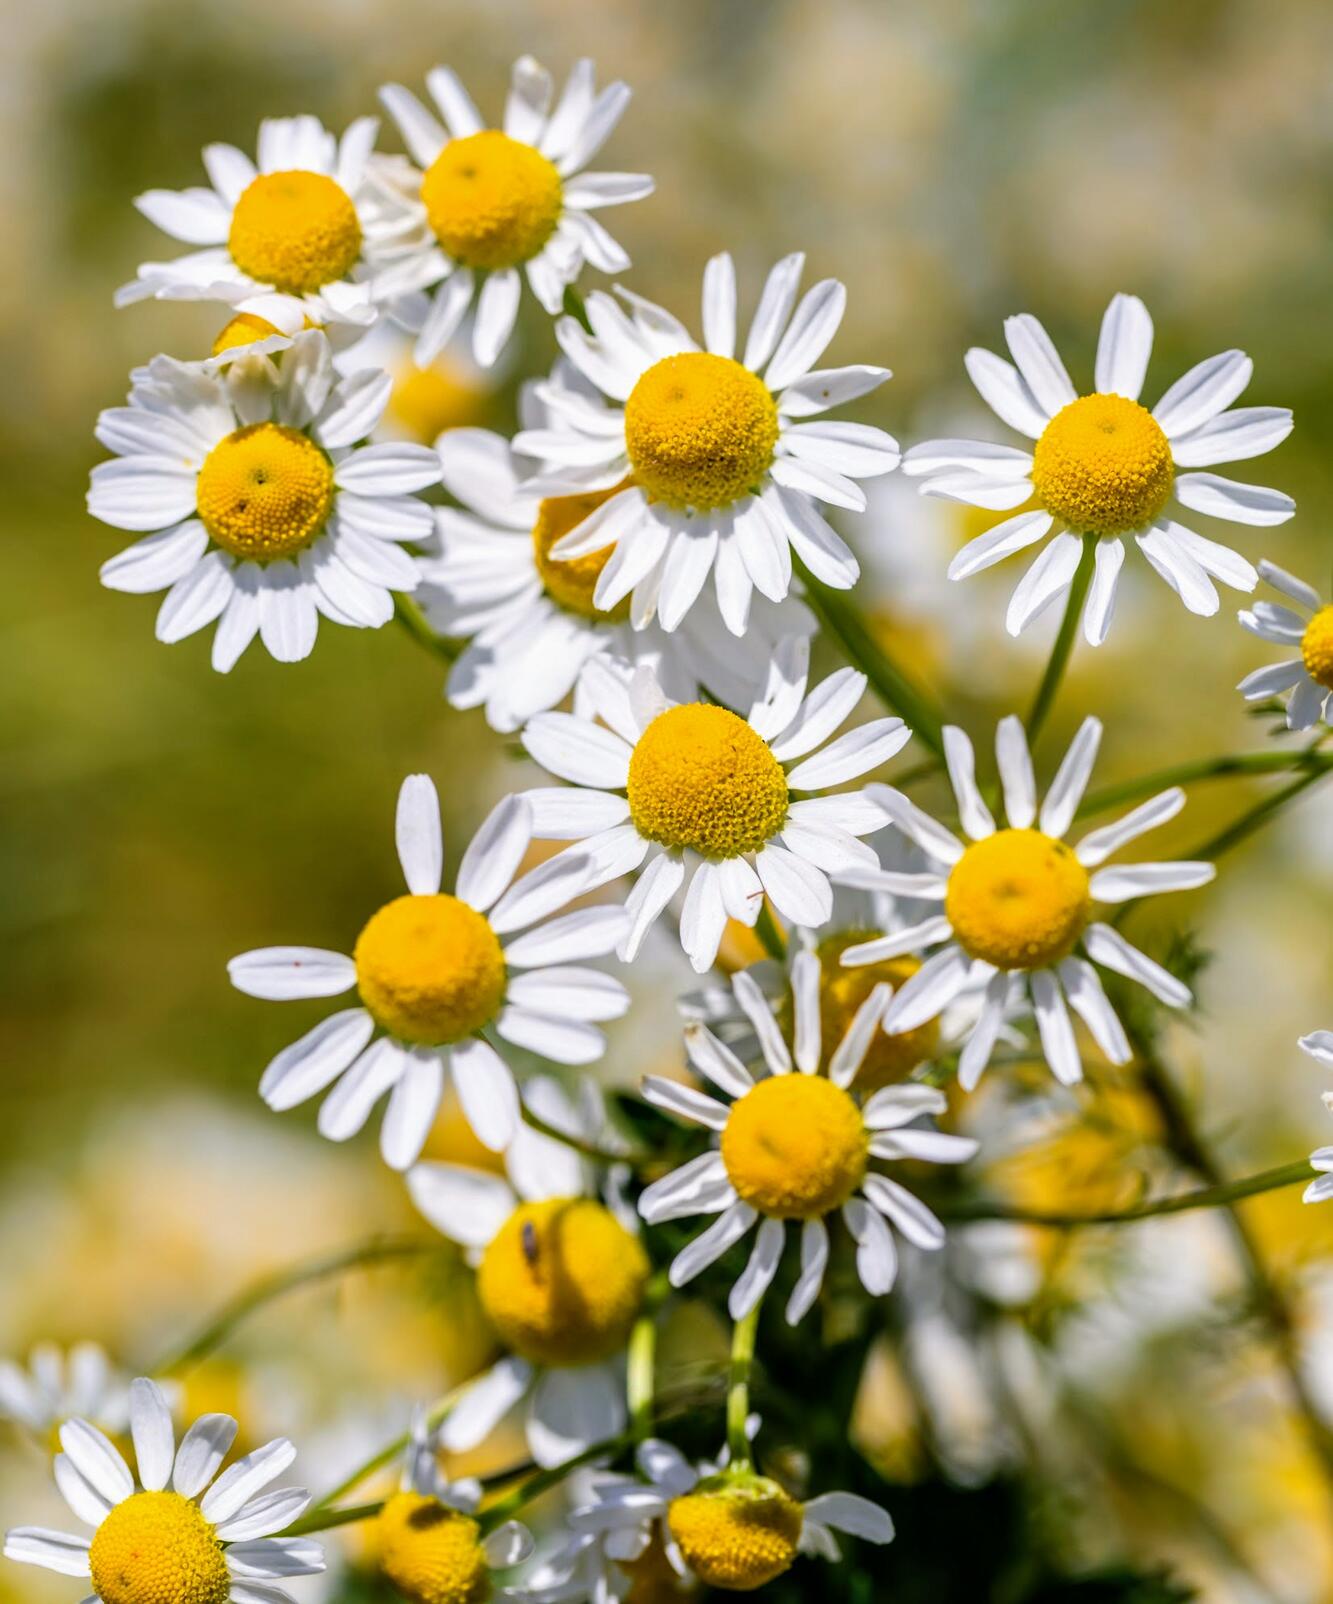 kl_chamomile_active-ingredient_field_plant_2019 -64- 265x265